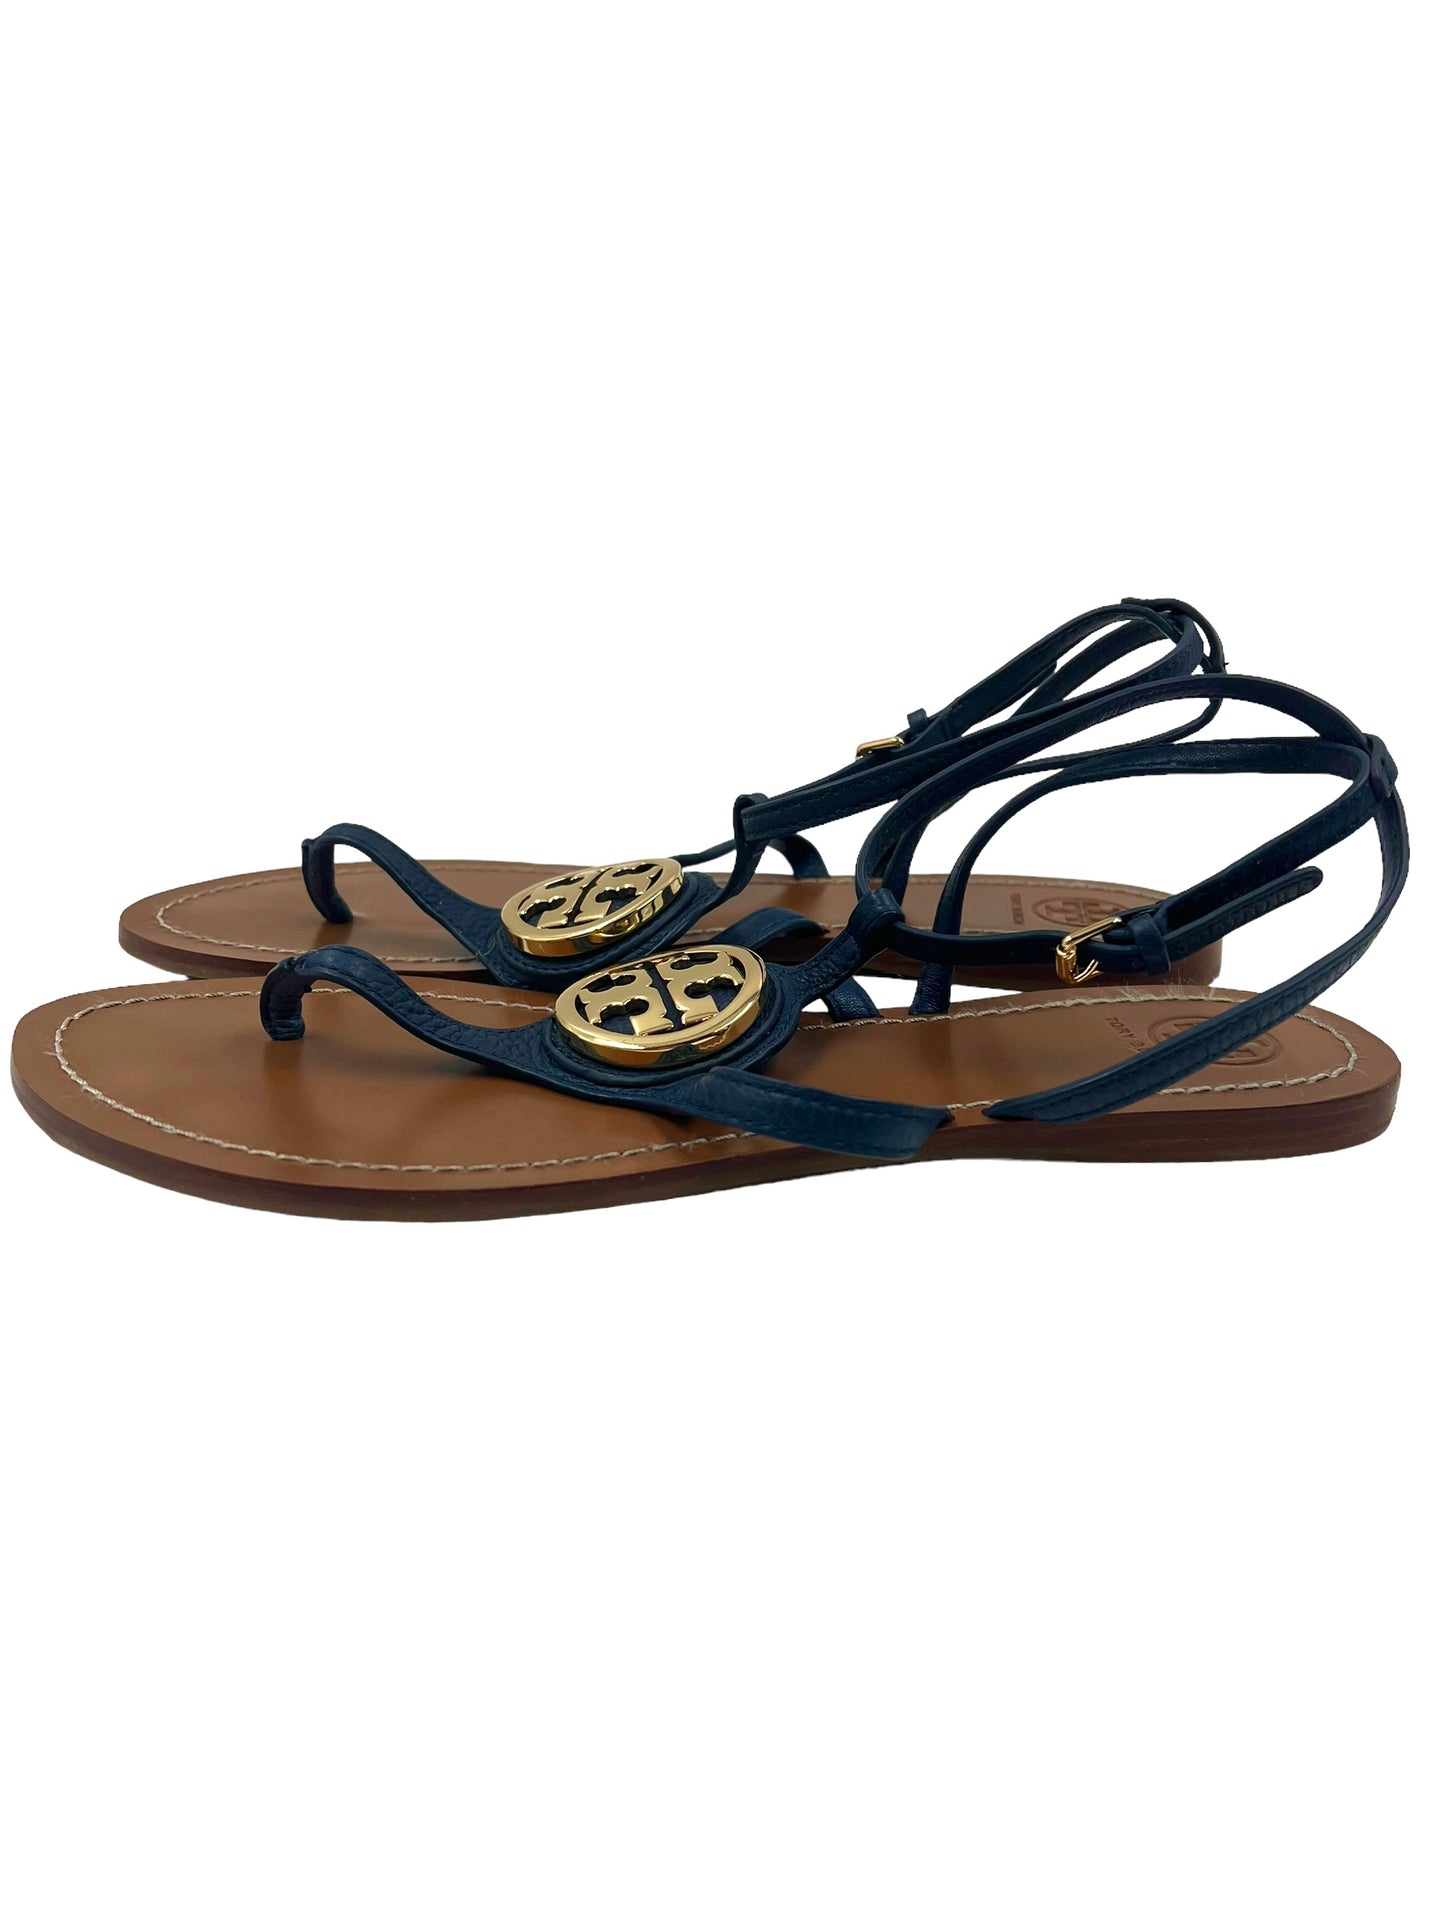 Tory Burch Blue Leather Size 10 'Miller' Sandals